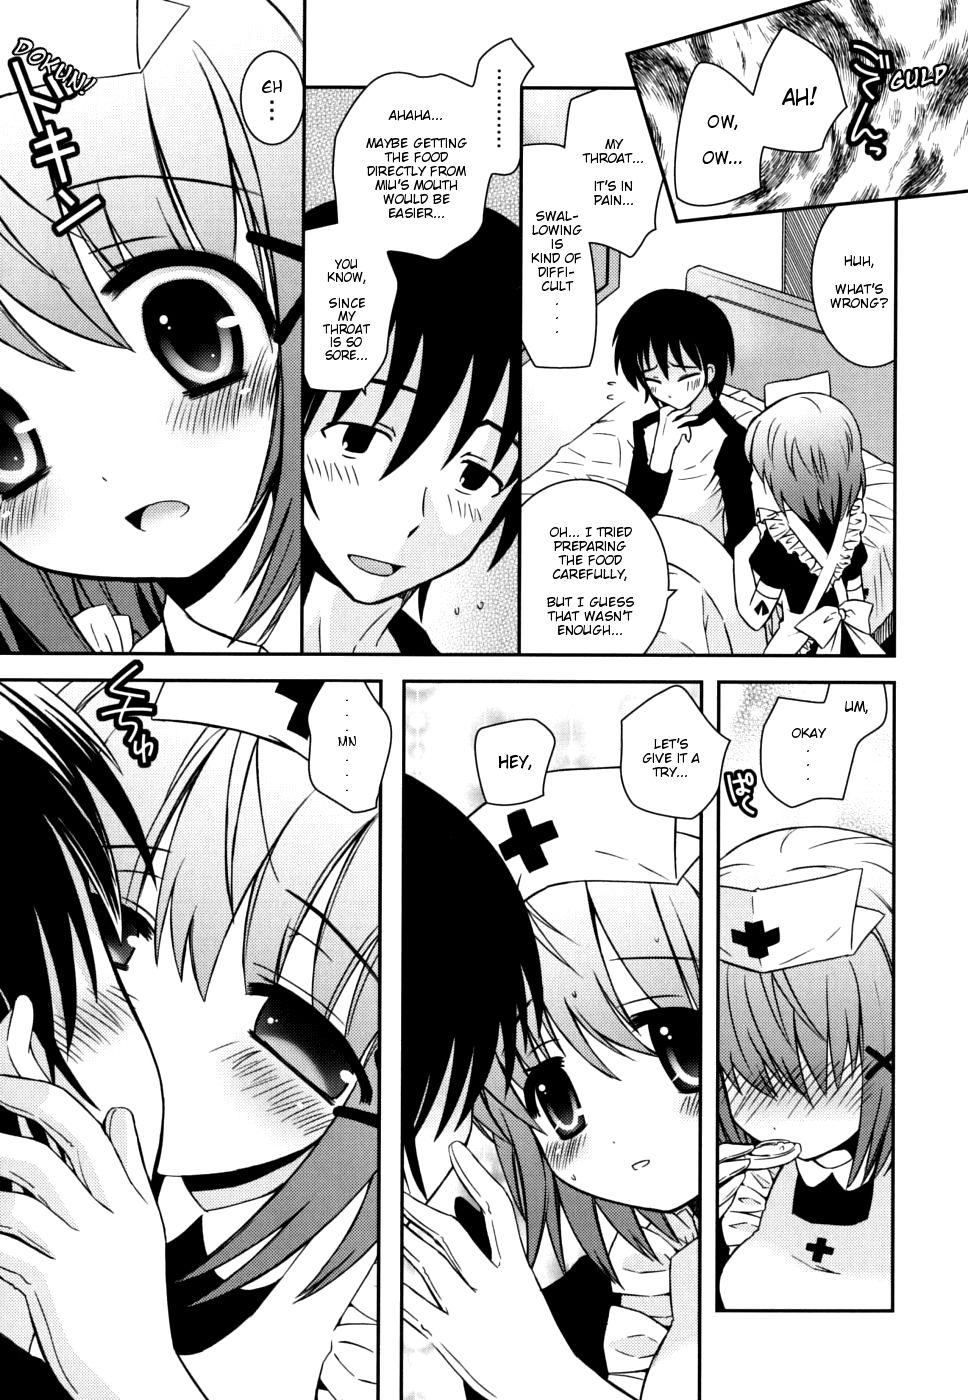 Boy Imouto Pandemic! - Younger sister Pandemic Naked Women Fucking - Page 5